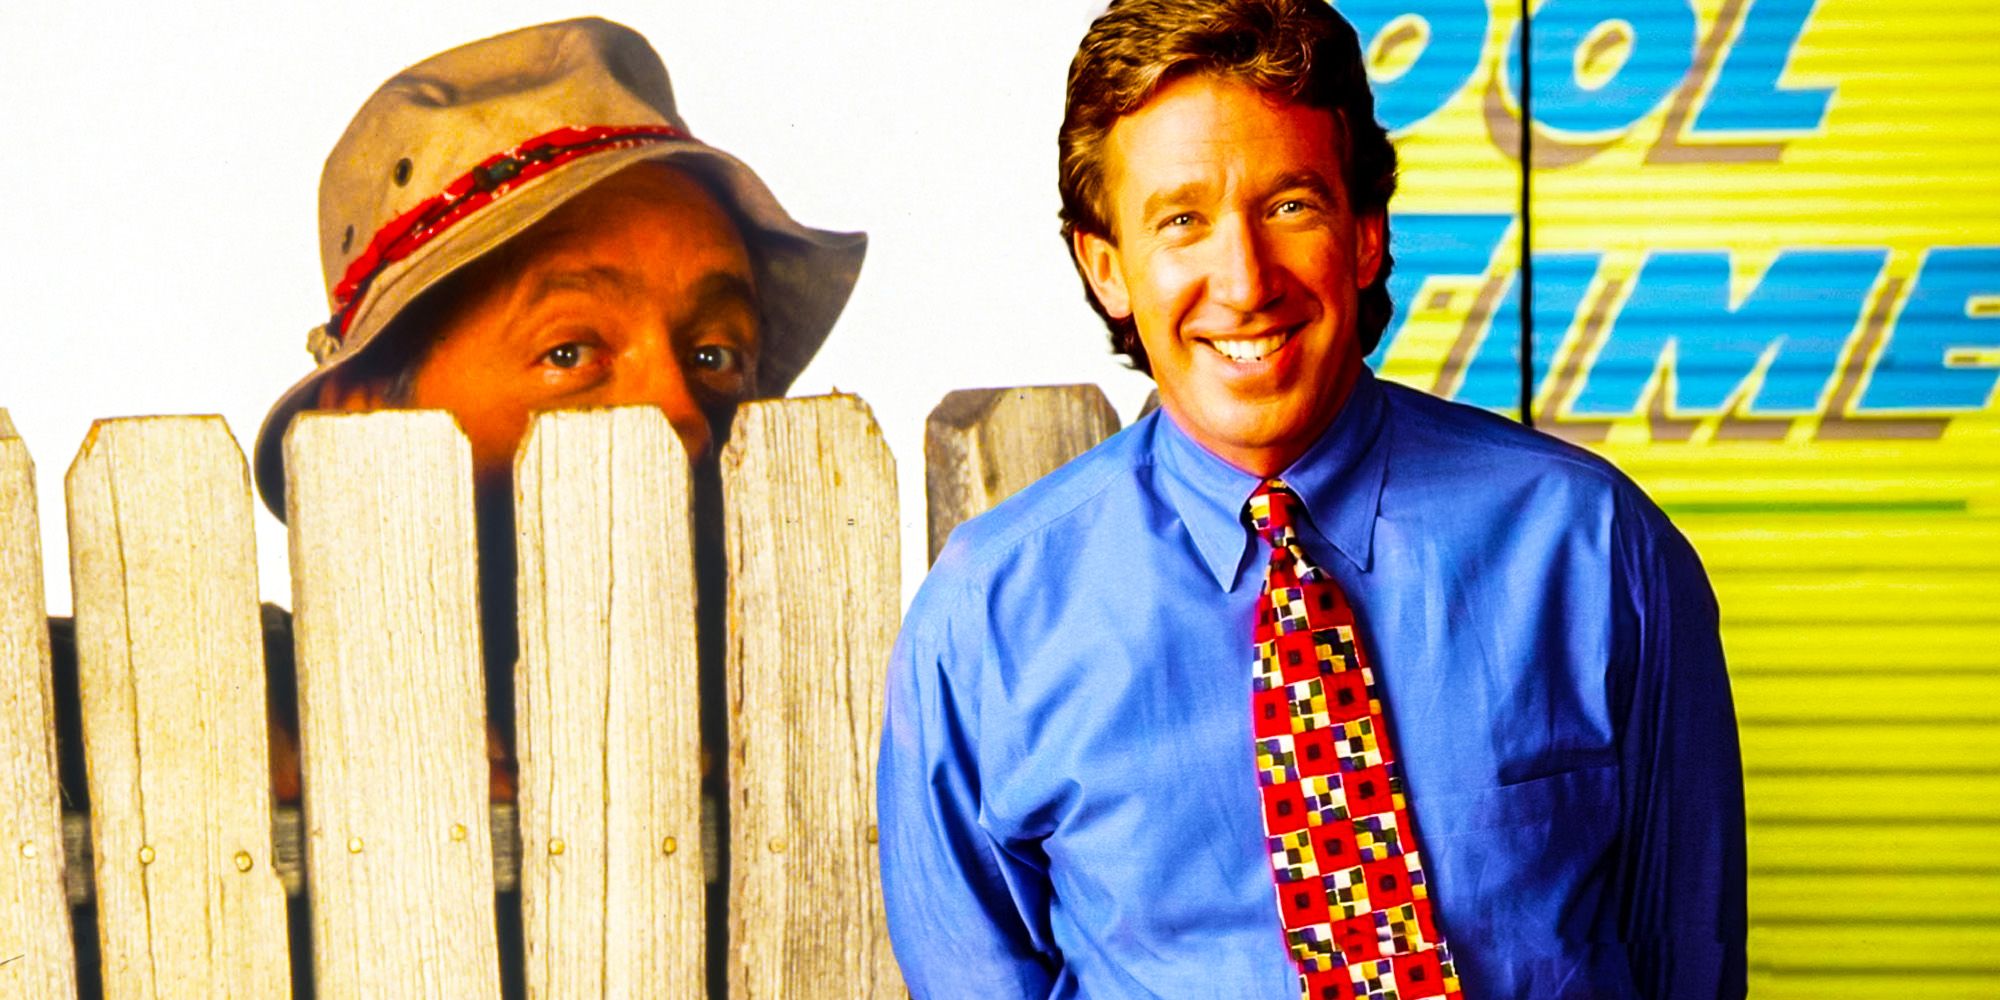 The Real Reason Home Improvement Always Hid Wilson’s Face